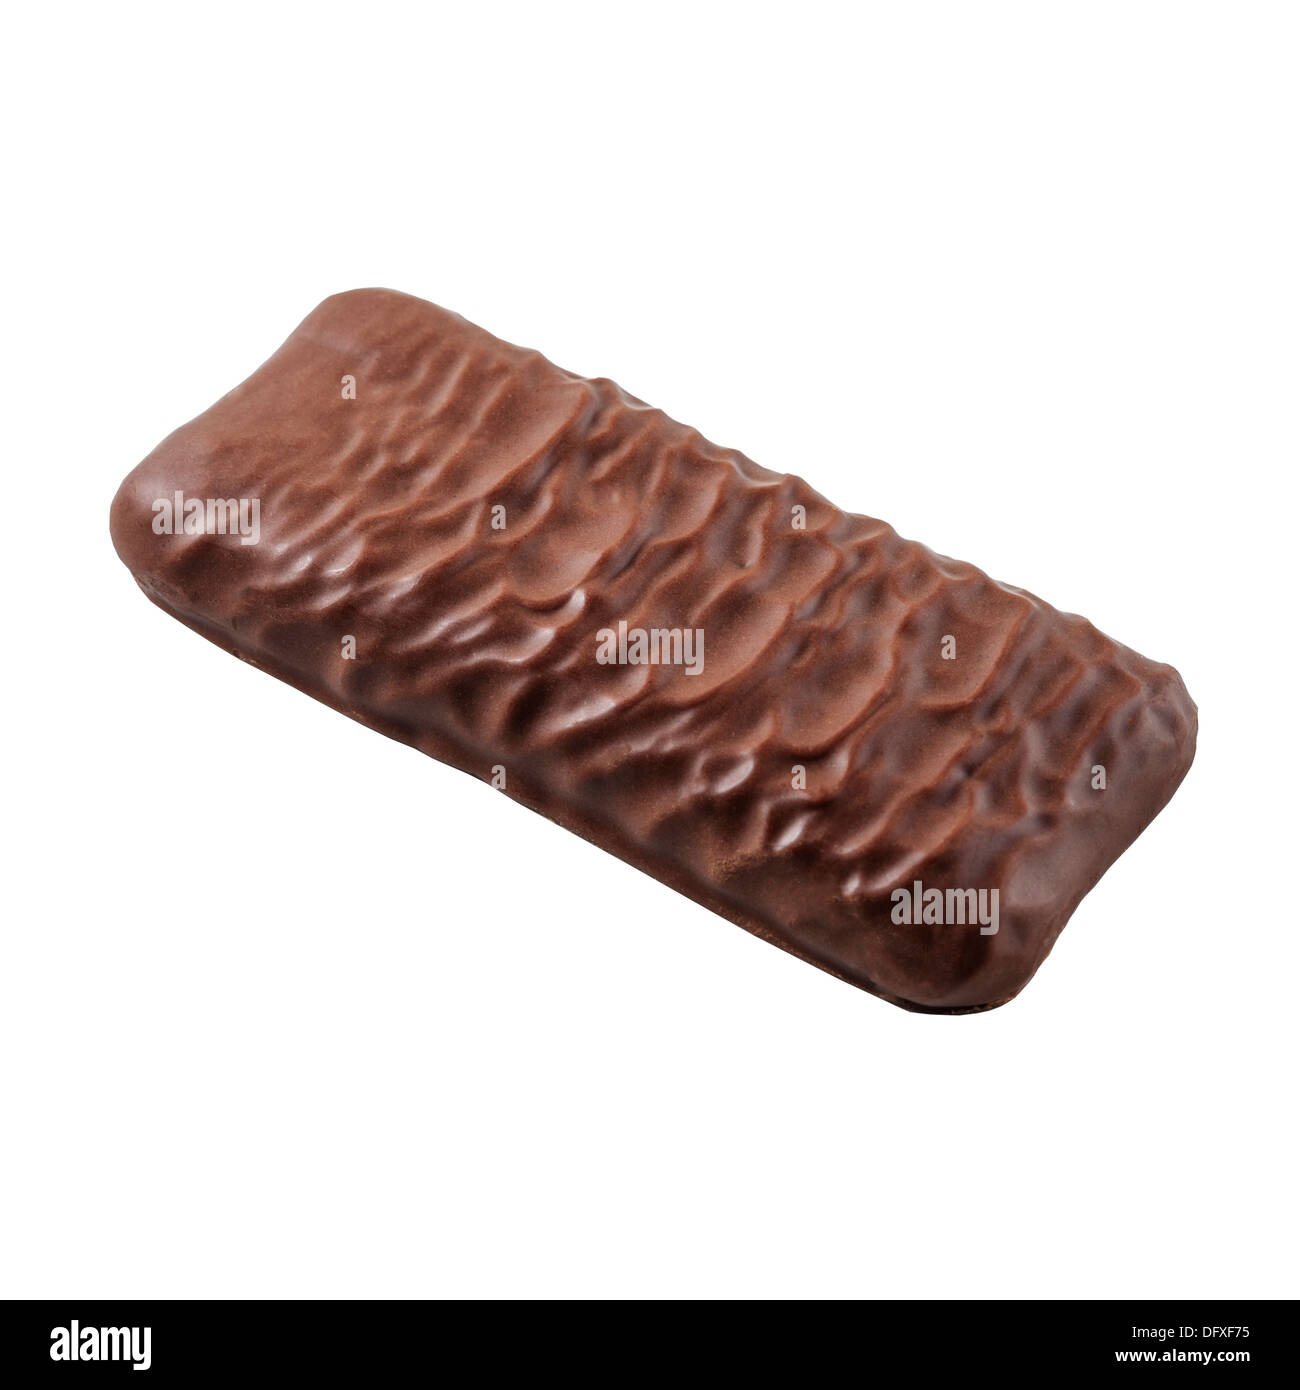 A chocolate coated biscuit on a white background Stock Photo